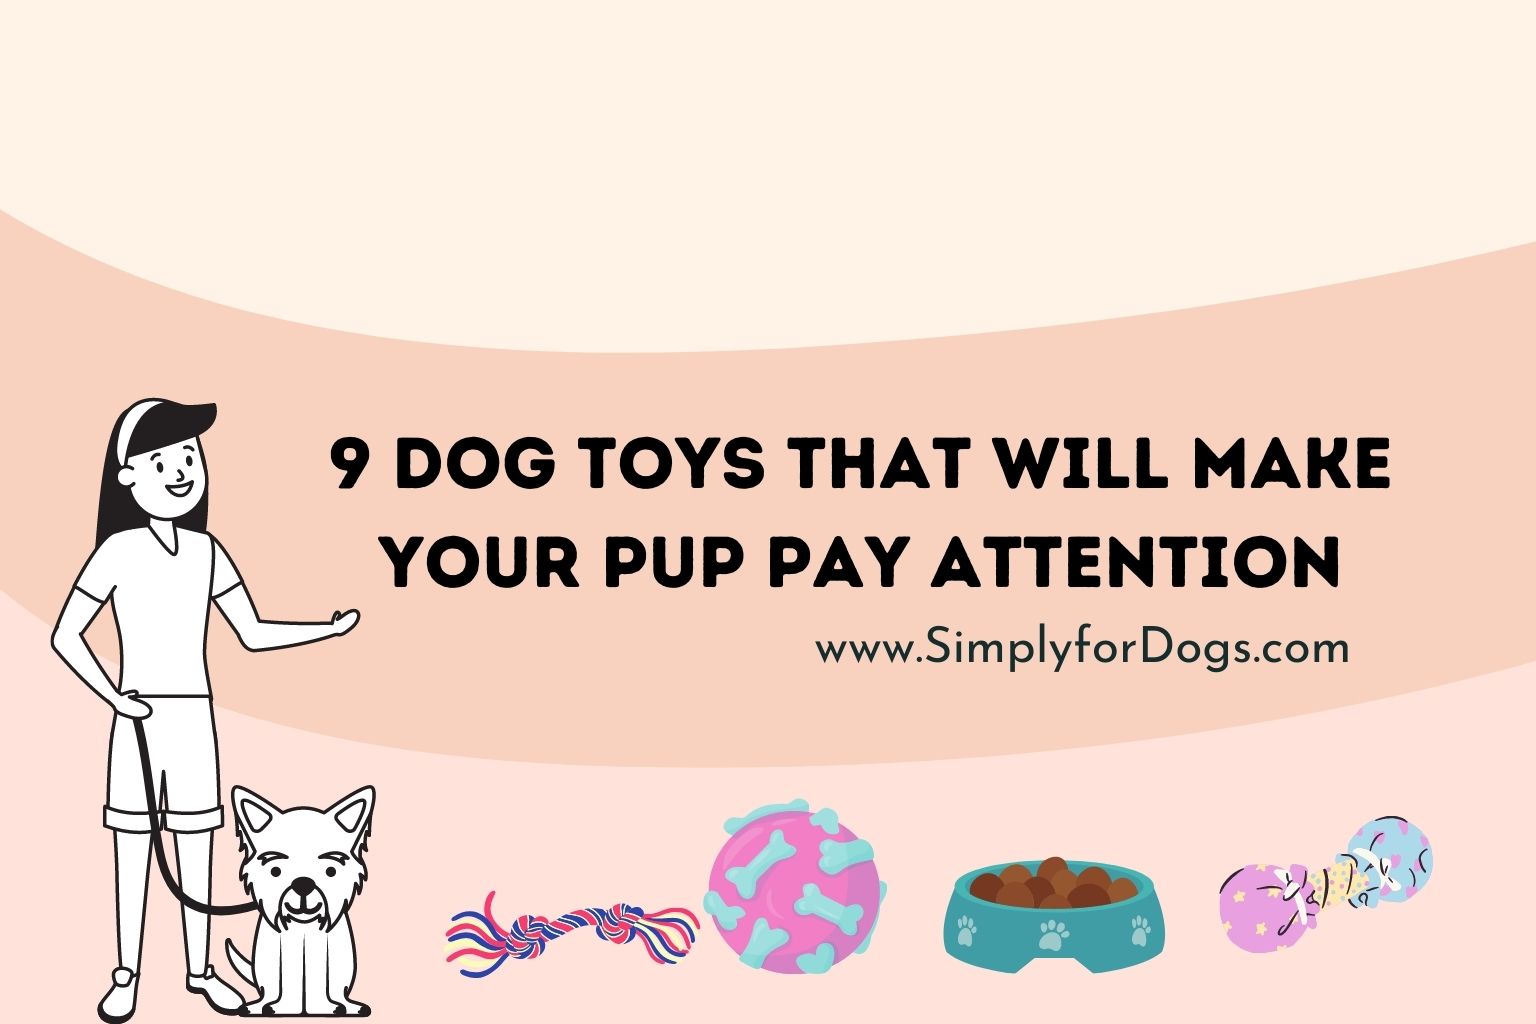 9 Dog Toys That Will Make Your Pup Pay Attention